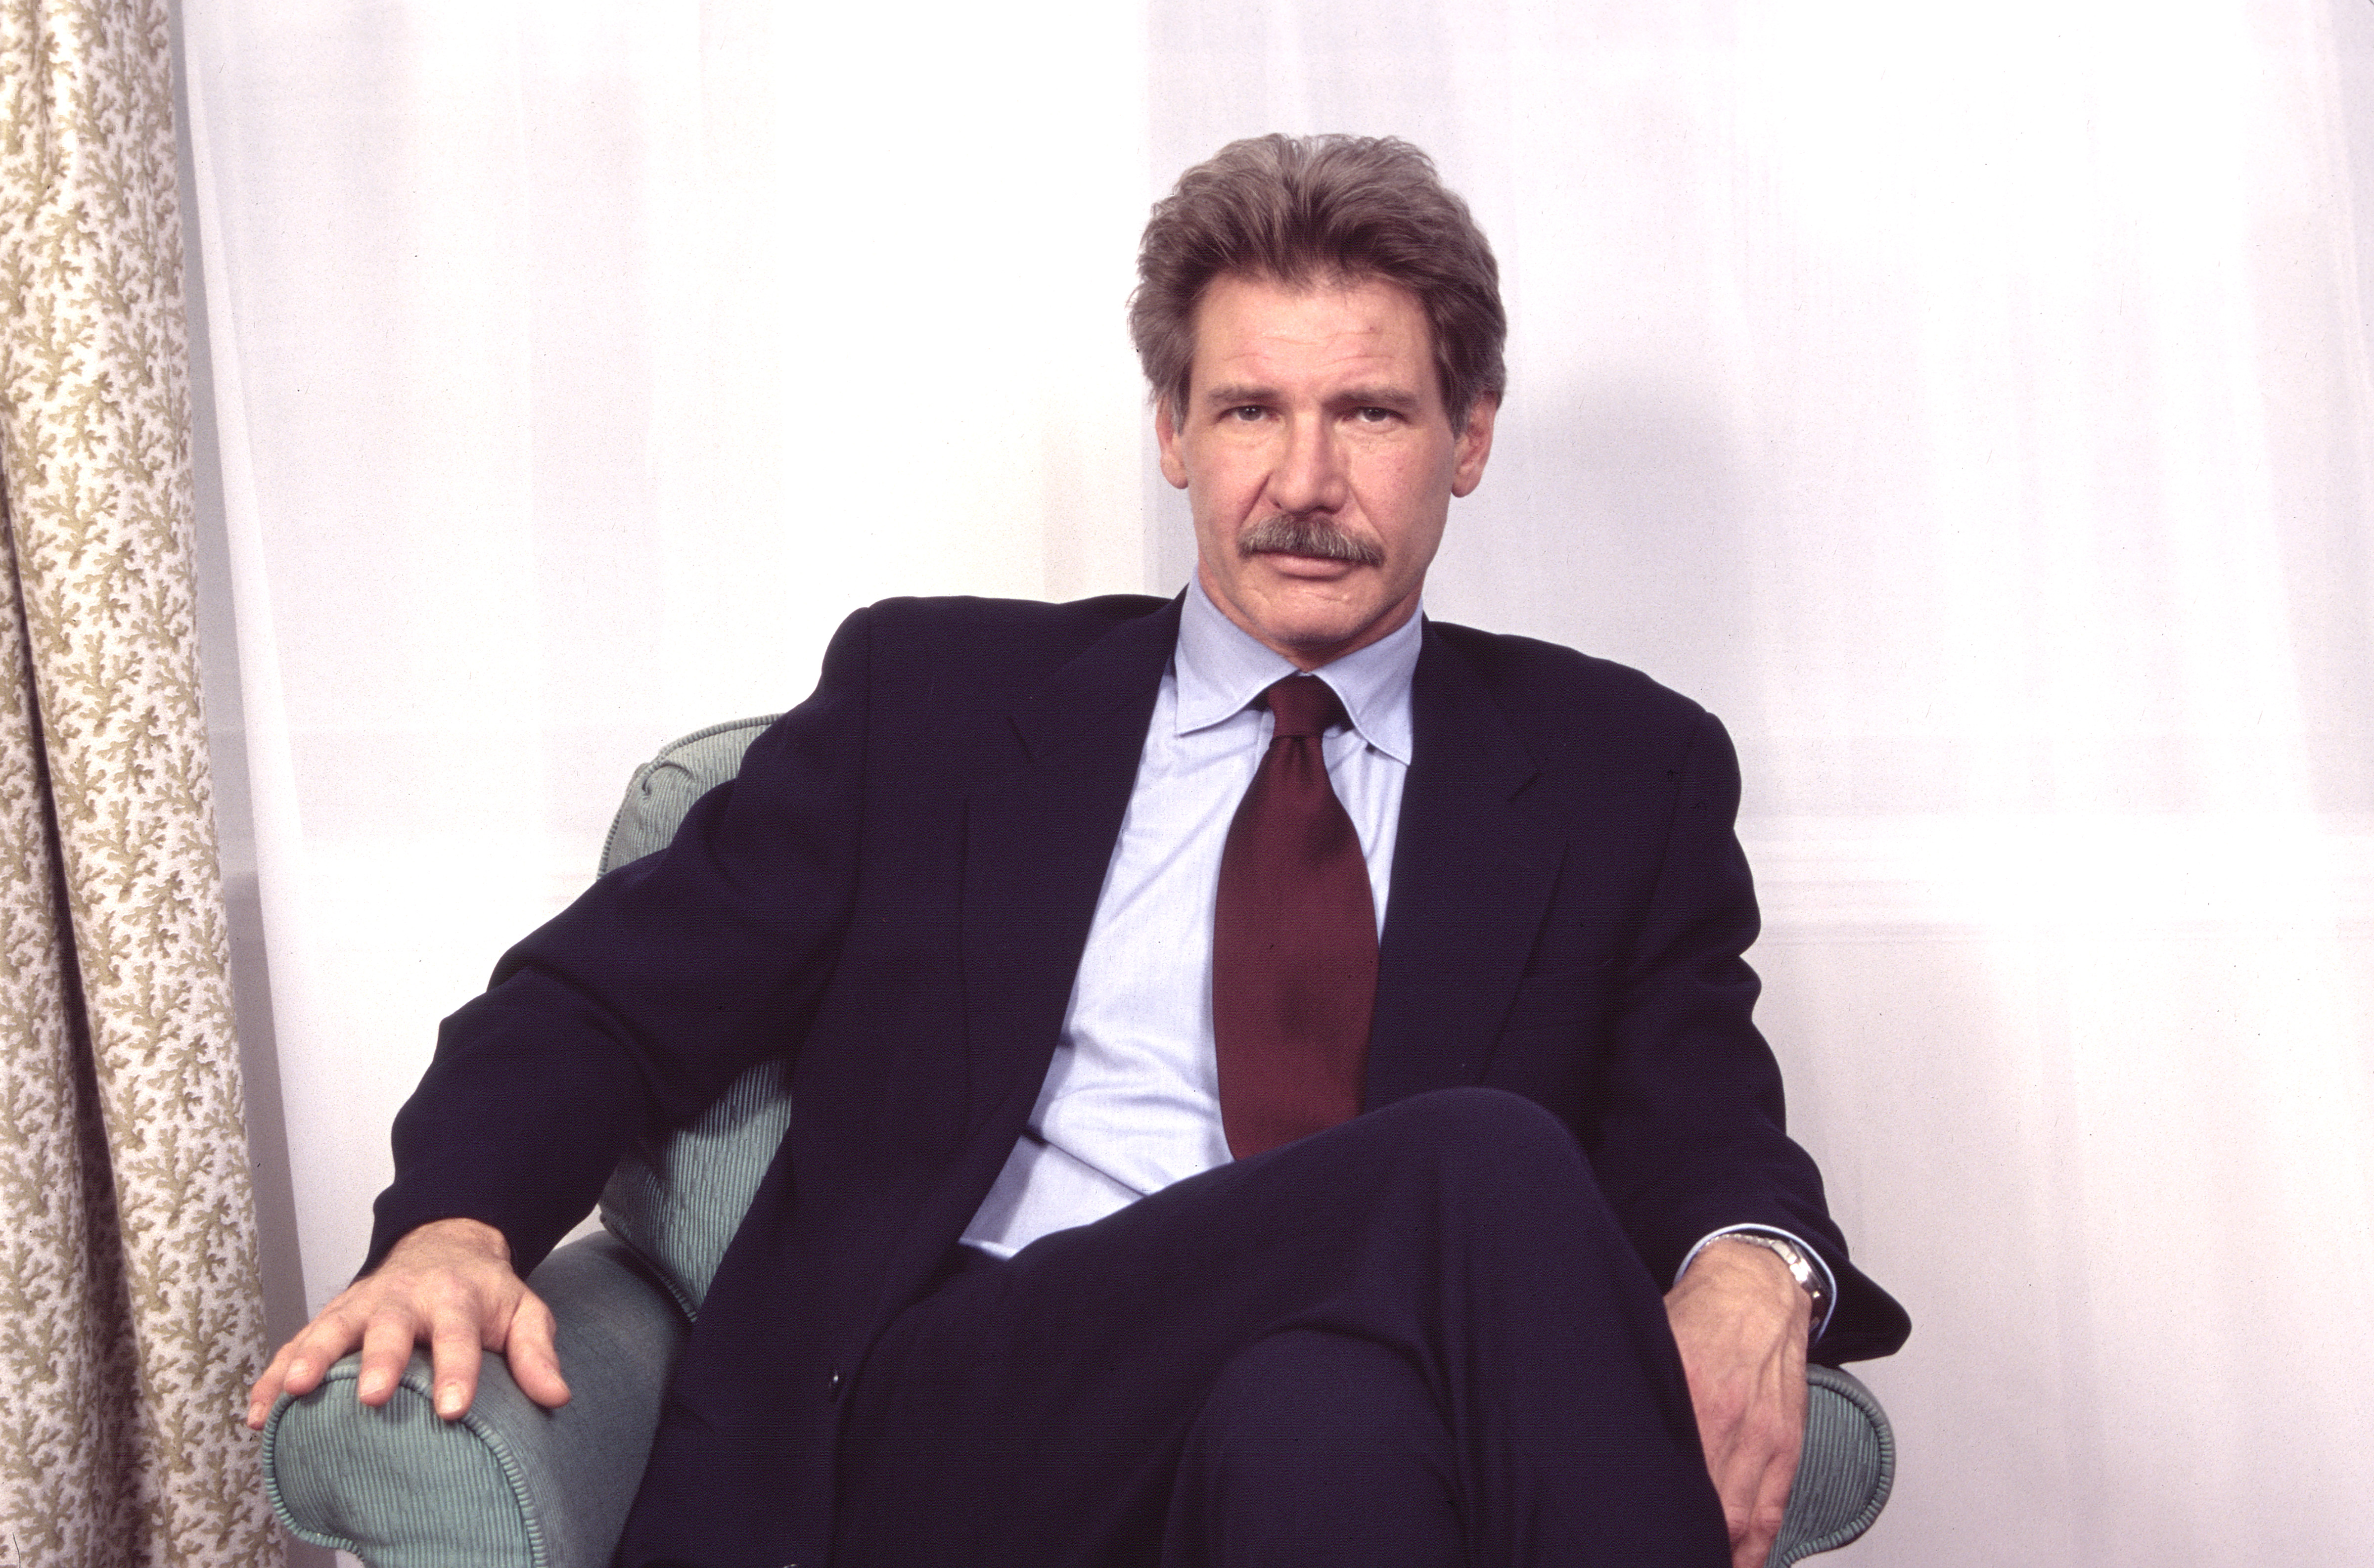 Harrison Ford at the Essex House, New York, New York, November 20, 1995 | Source: Getty Images